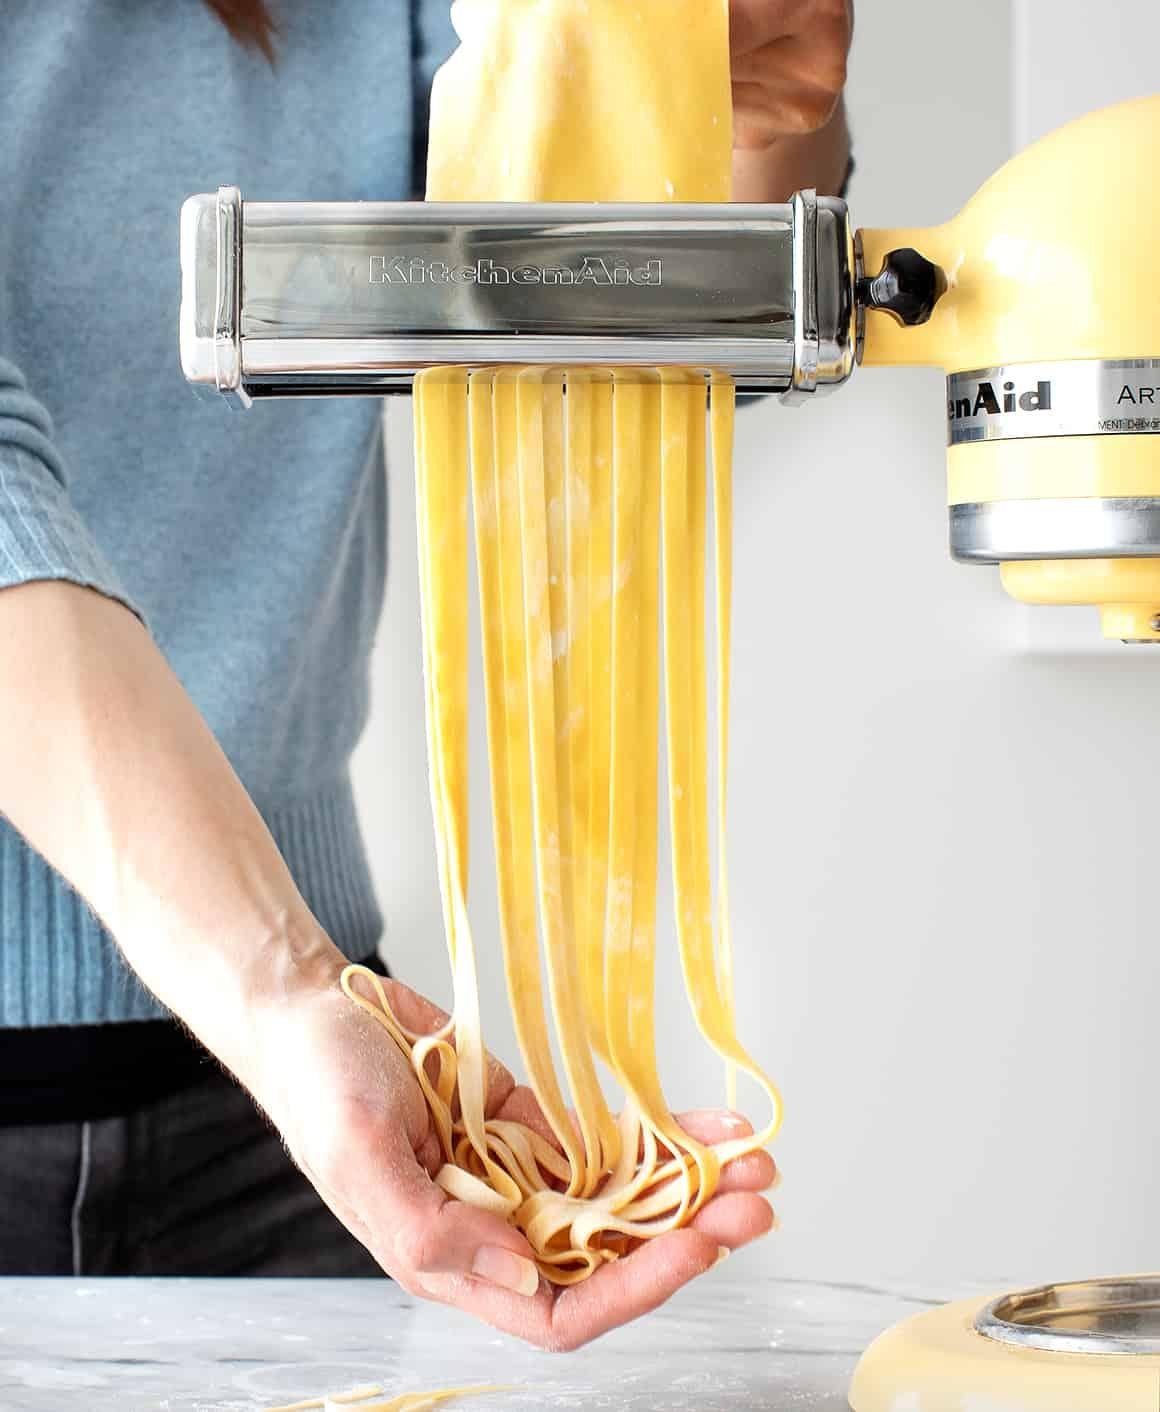 The Ultimate Guide to Making Homemade Fresh Pasta from Scratch